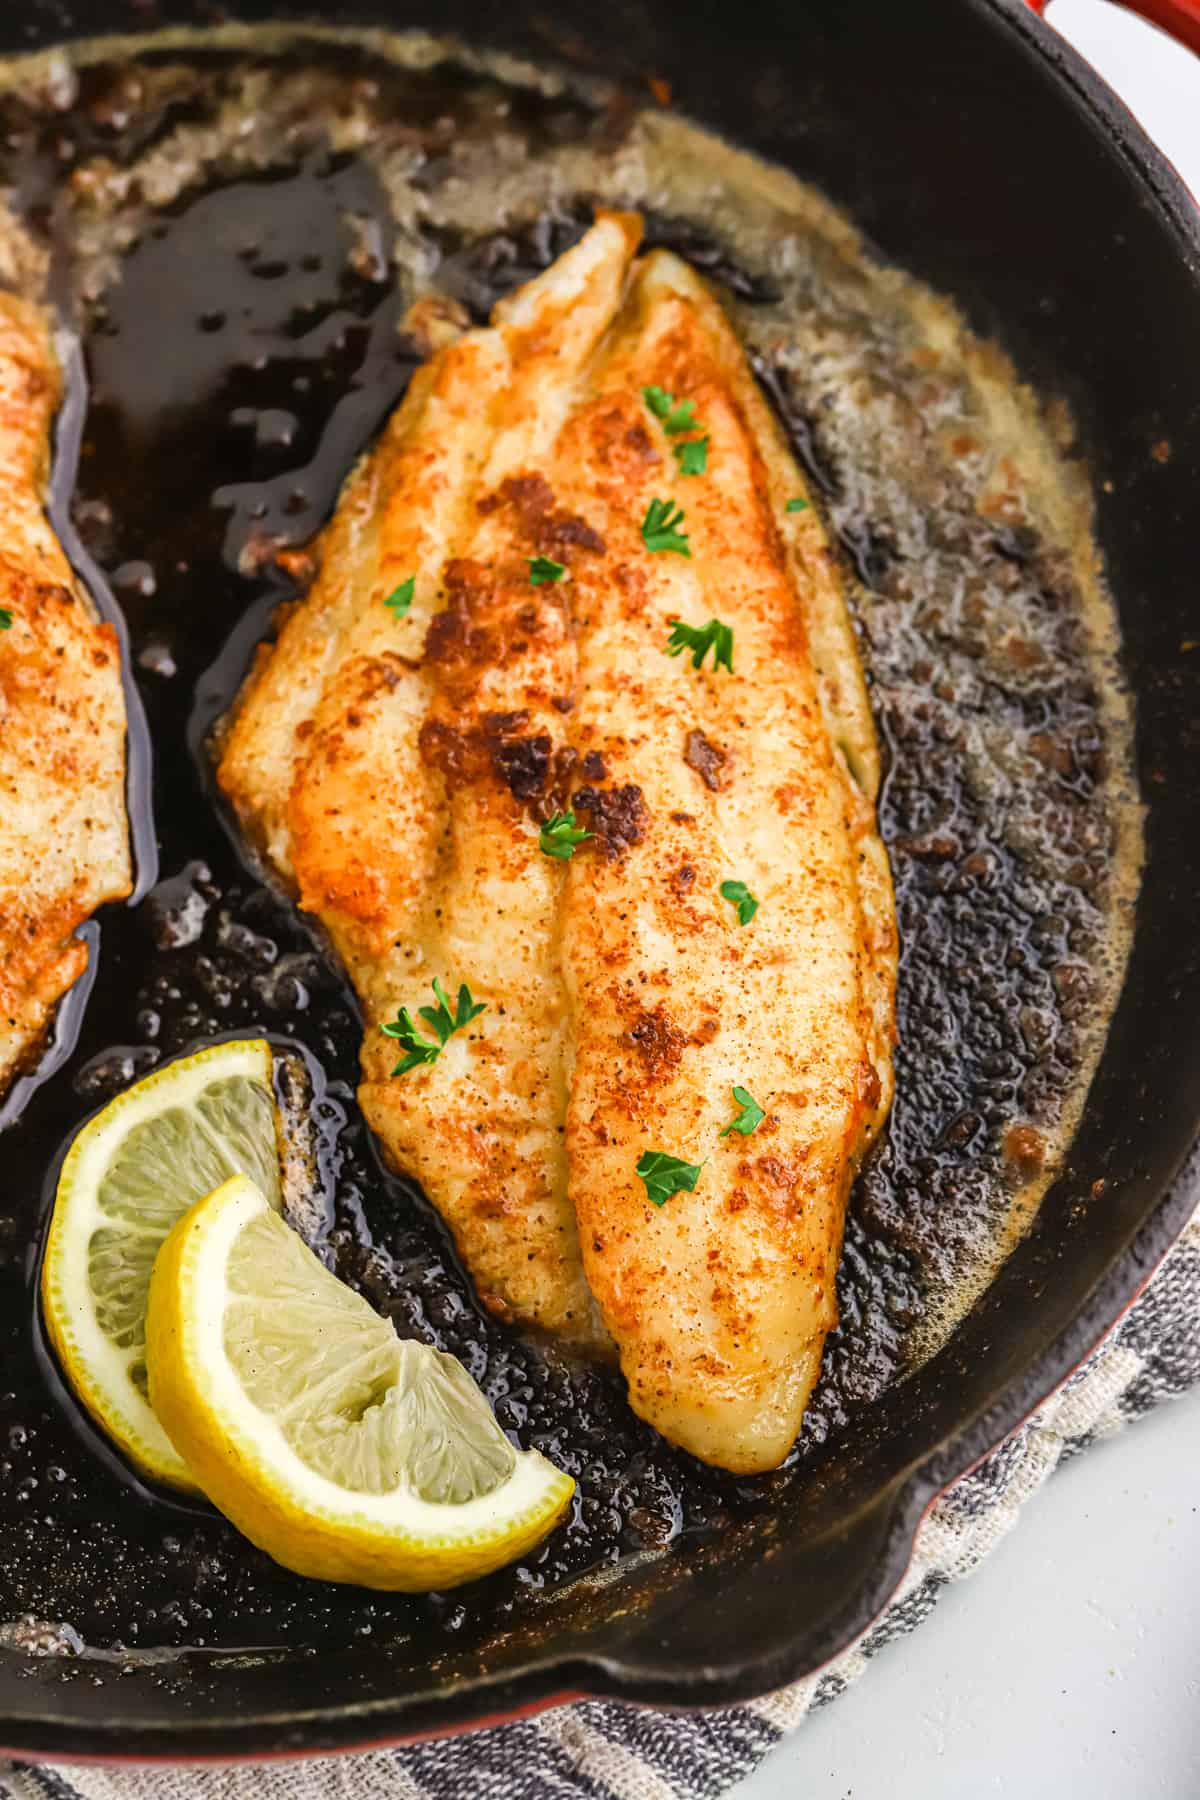 Blackened catfish in a cast iron skillet.